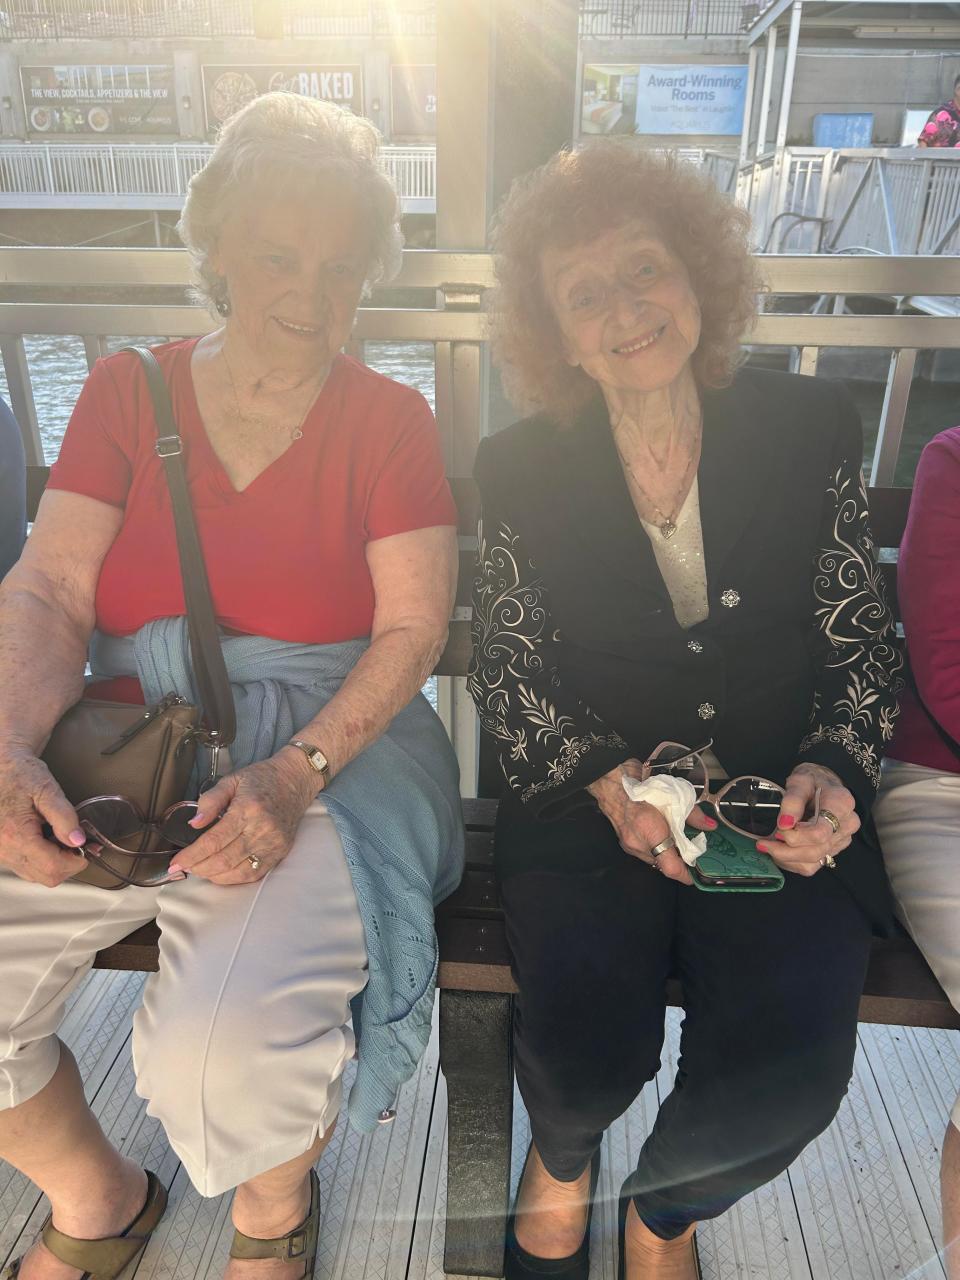 Barbara Carolan, 94, recently flew across the country to reunite with her 91-year-old sister Shirley. Carolan's granddaughter captured the reunion on video and it has since gone viral.